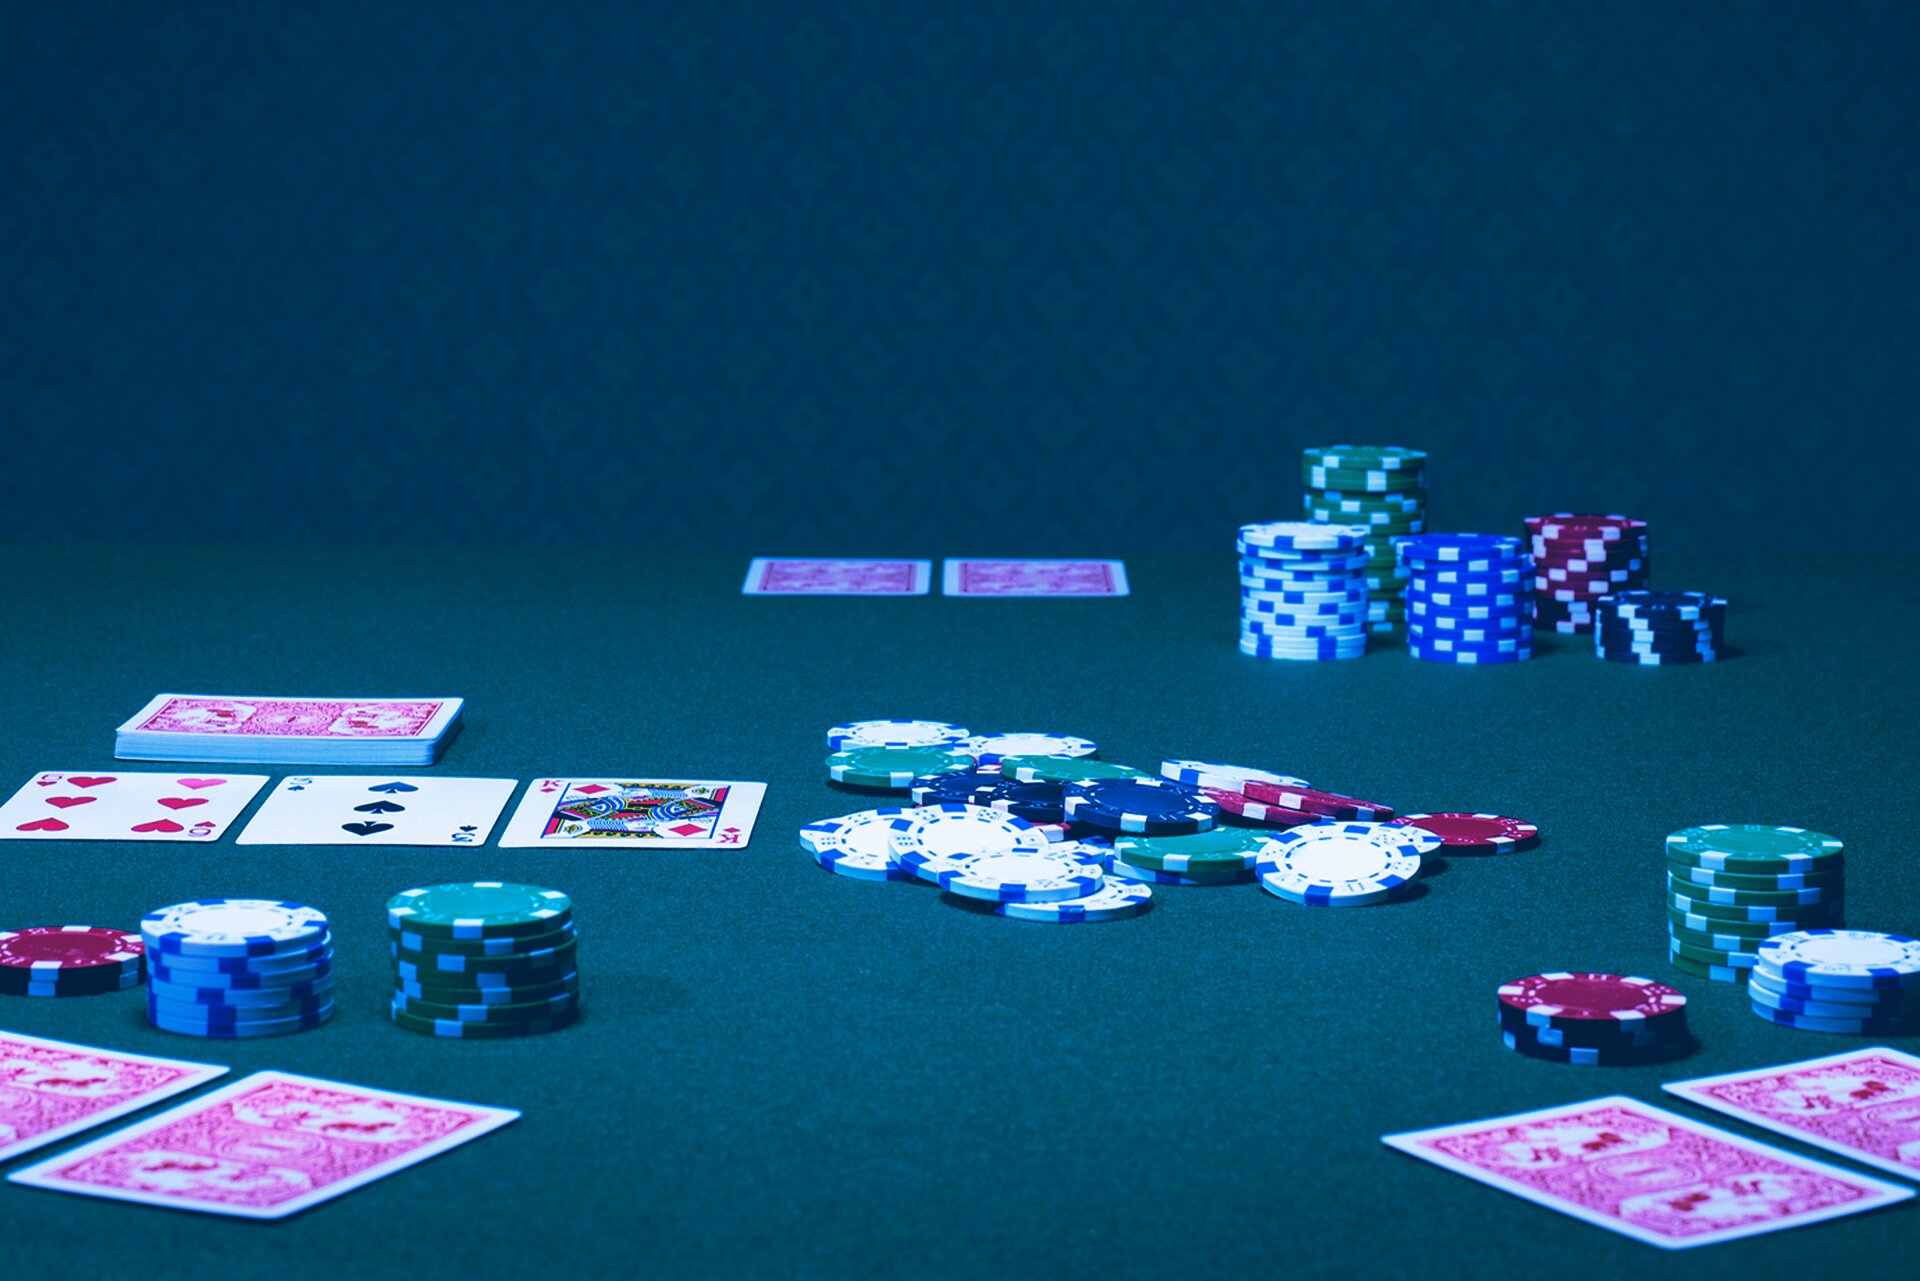 best online casino to play texas holdem